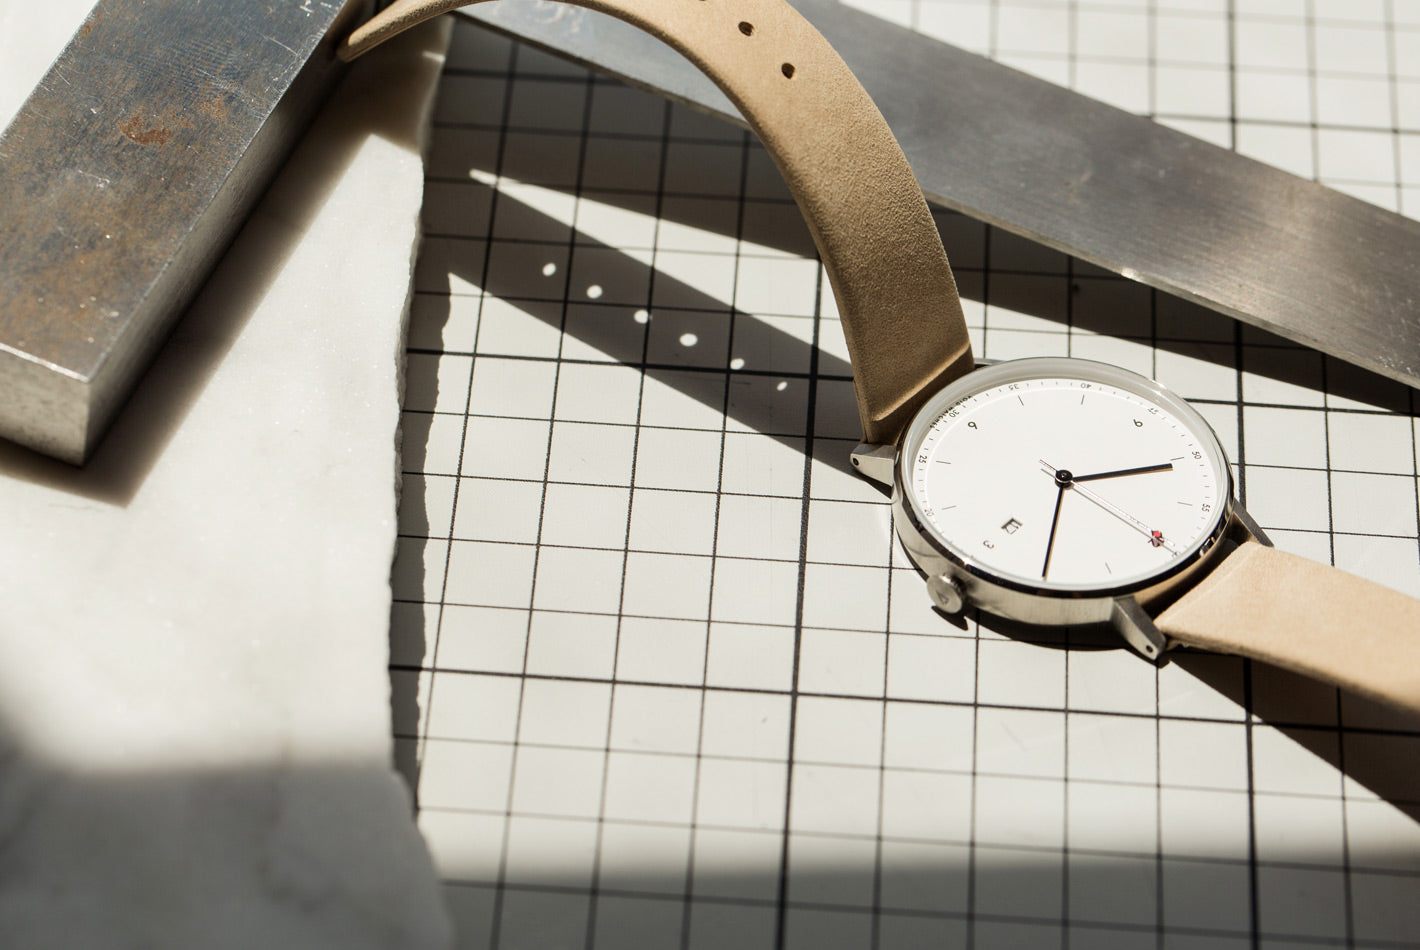 Replacement strap by VOID Watches using Sorensen Leather